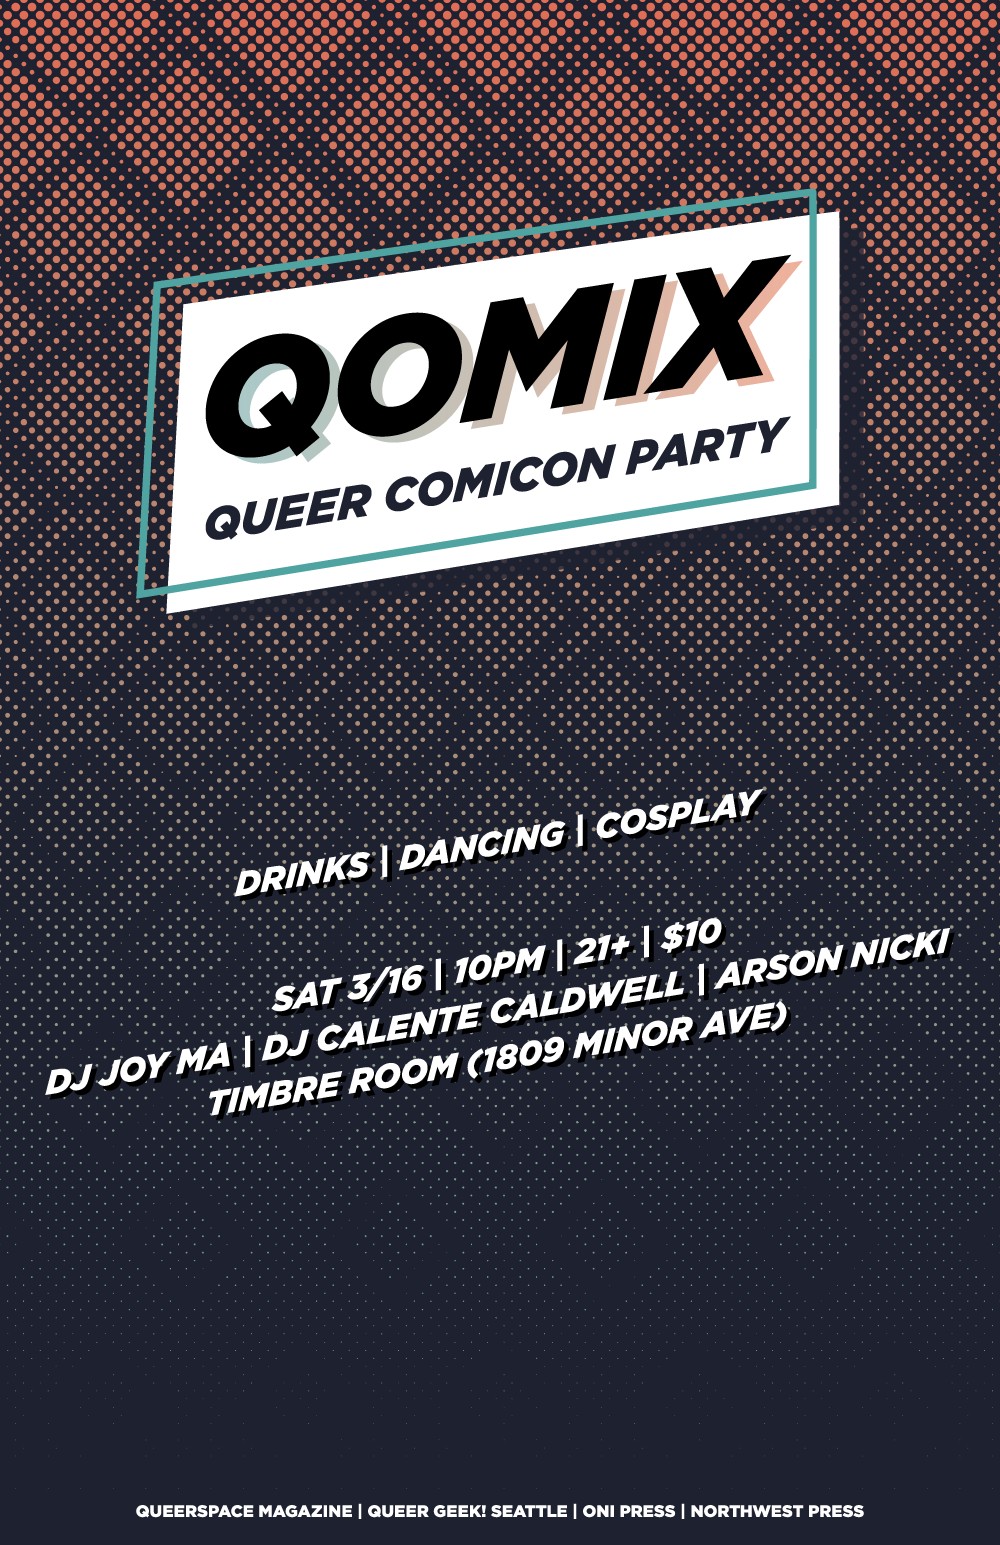 Qomix Queer Comicon Party Tickets Timbre Room Seattle Wa Sat Mar 16 2019 At 10pm 